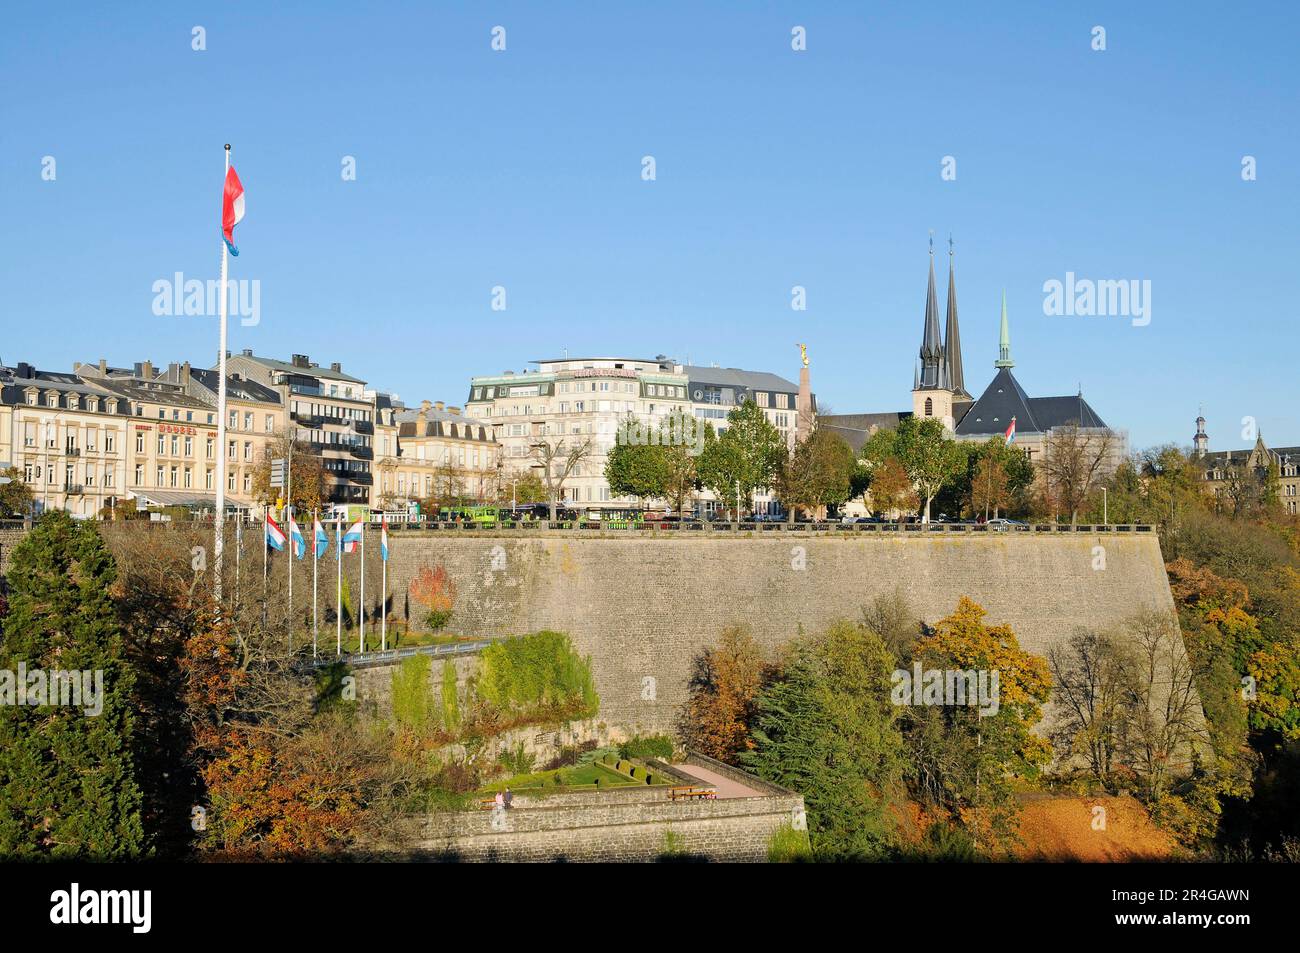 Petrusse Valley, Petrusse, Place de Constitution, Notre Dame Cathedral, Luxembourg City, Luxembourg Stock Photo